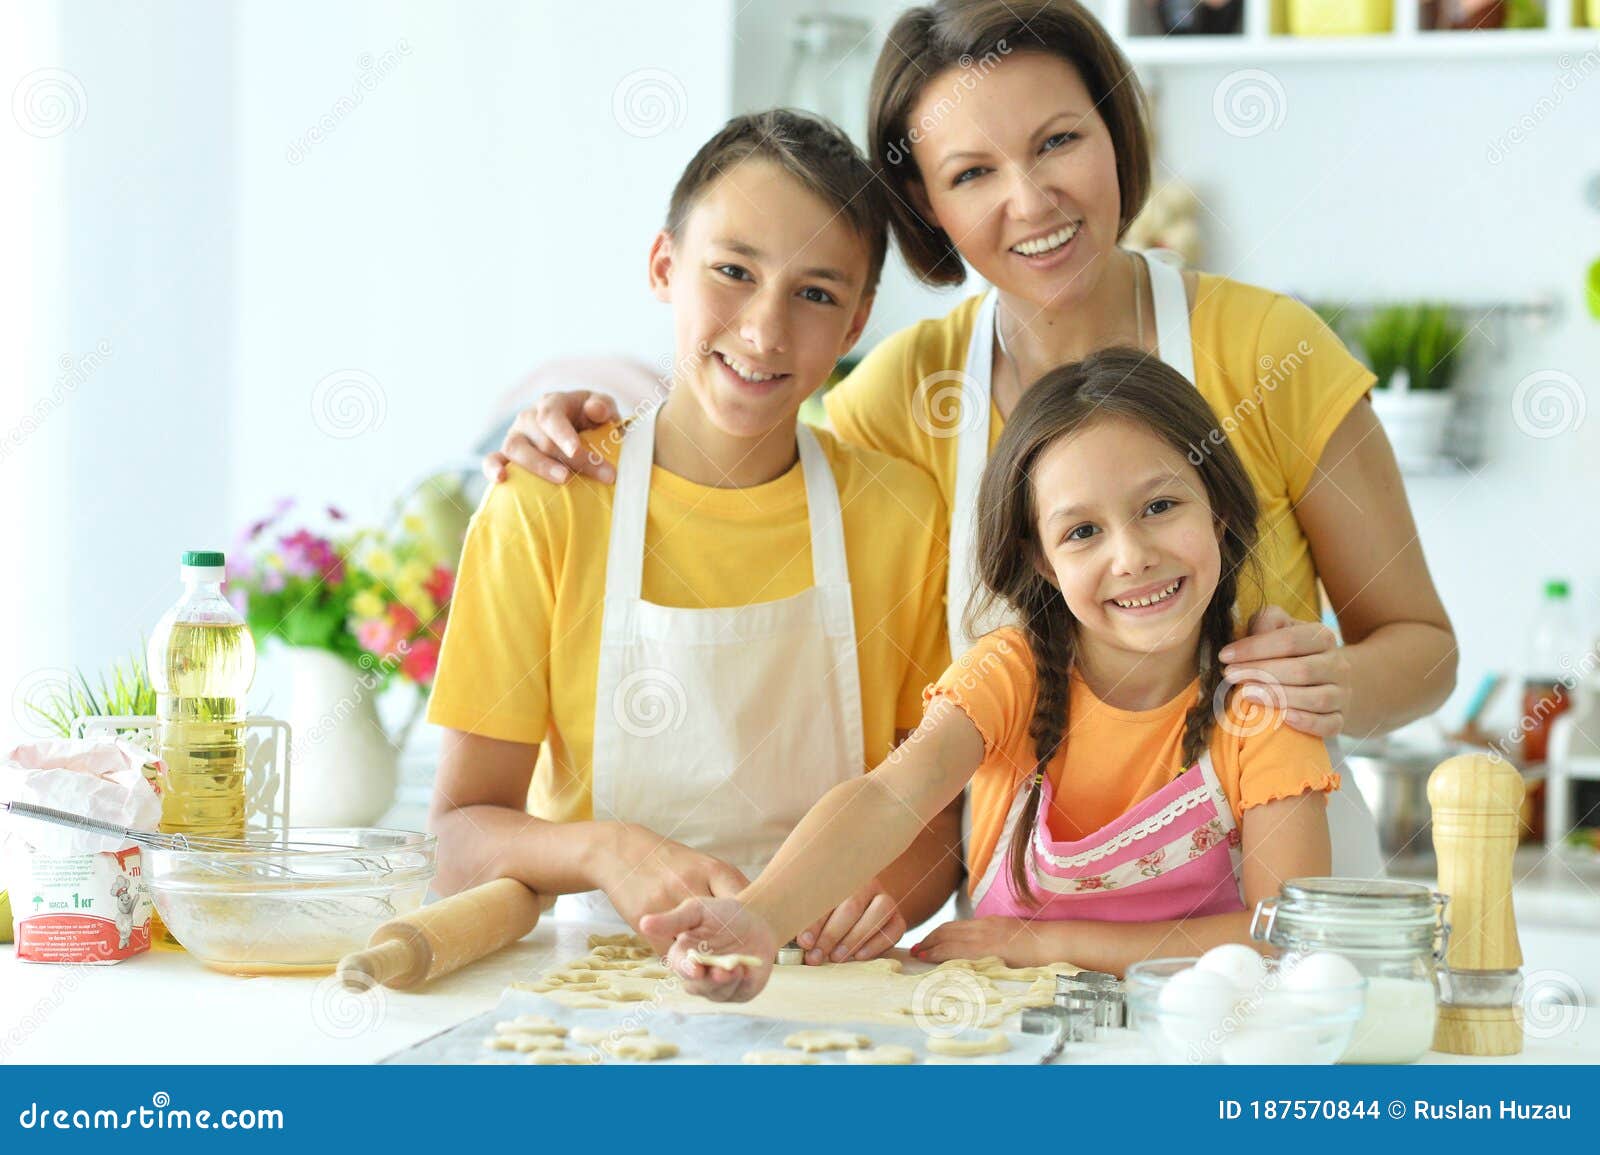 Happy Family Baking Together in the Kitchen Stock Photo - Image of